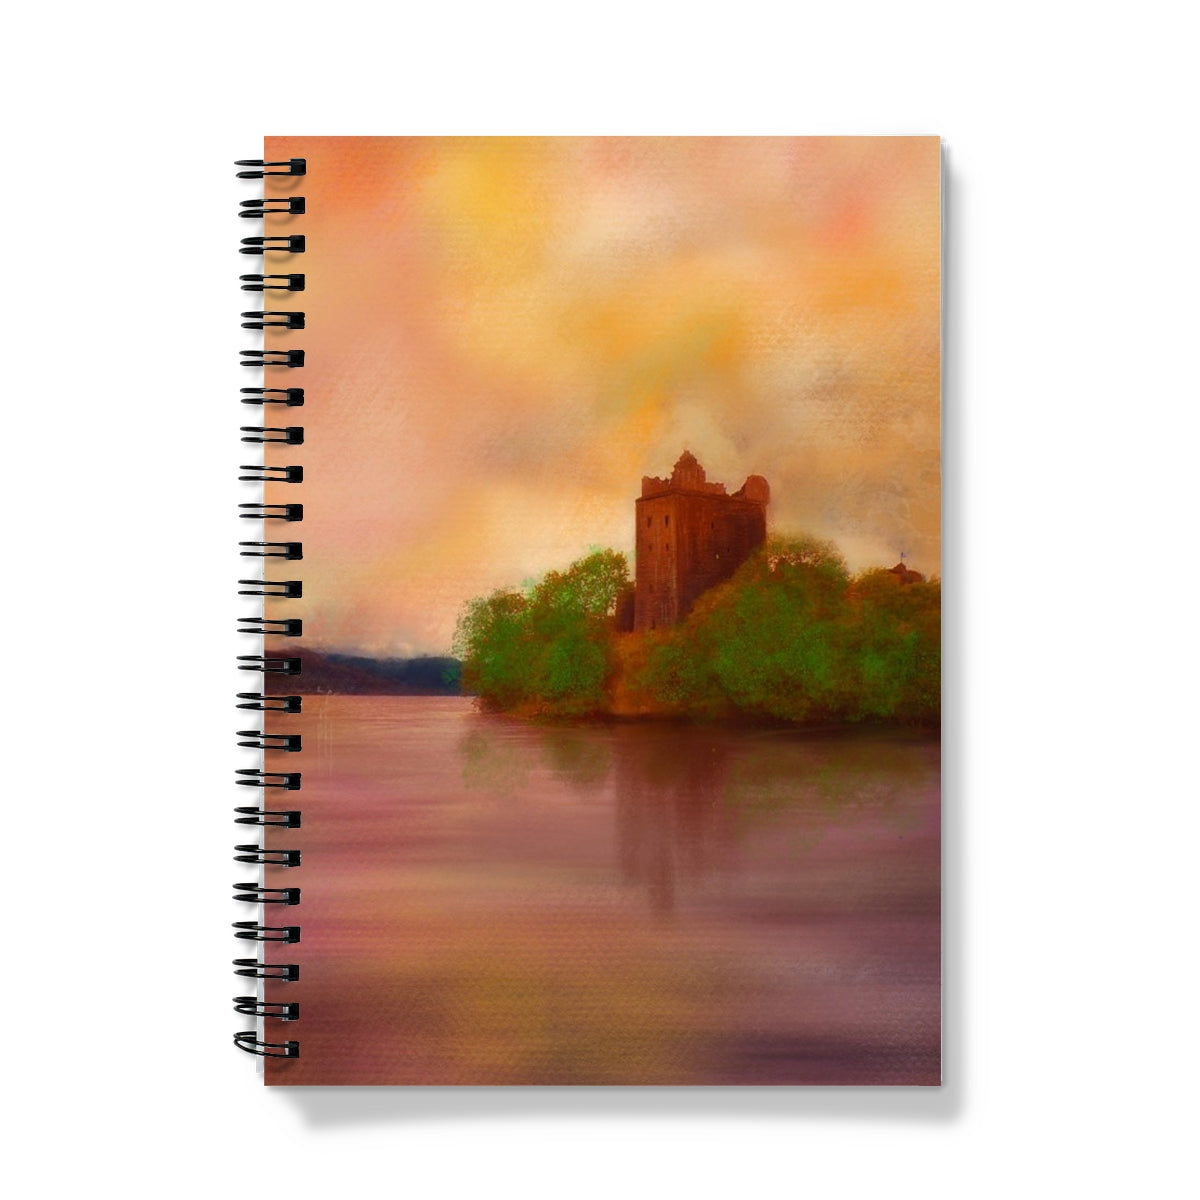 Urquhart Castle Art Gifts Notebook-Journals & Notebooks-Historic & Iconic Scotland Art Gallery-A4-Graph-Paintings, Prints, Homeware, Art Gifts From Scotland By Scottish Artist Kevin Hunter